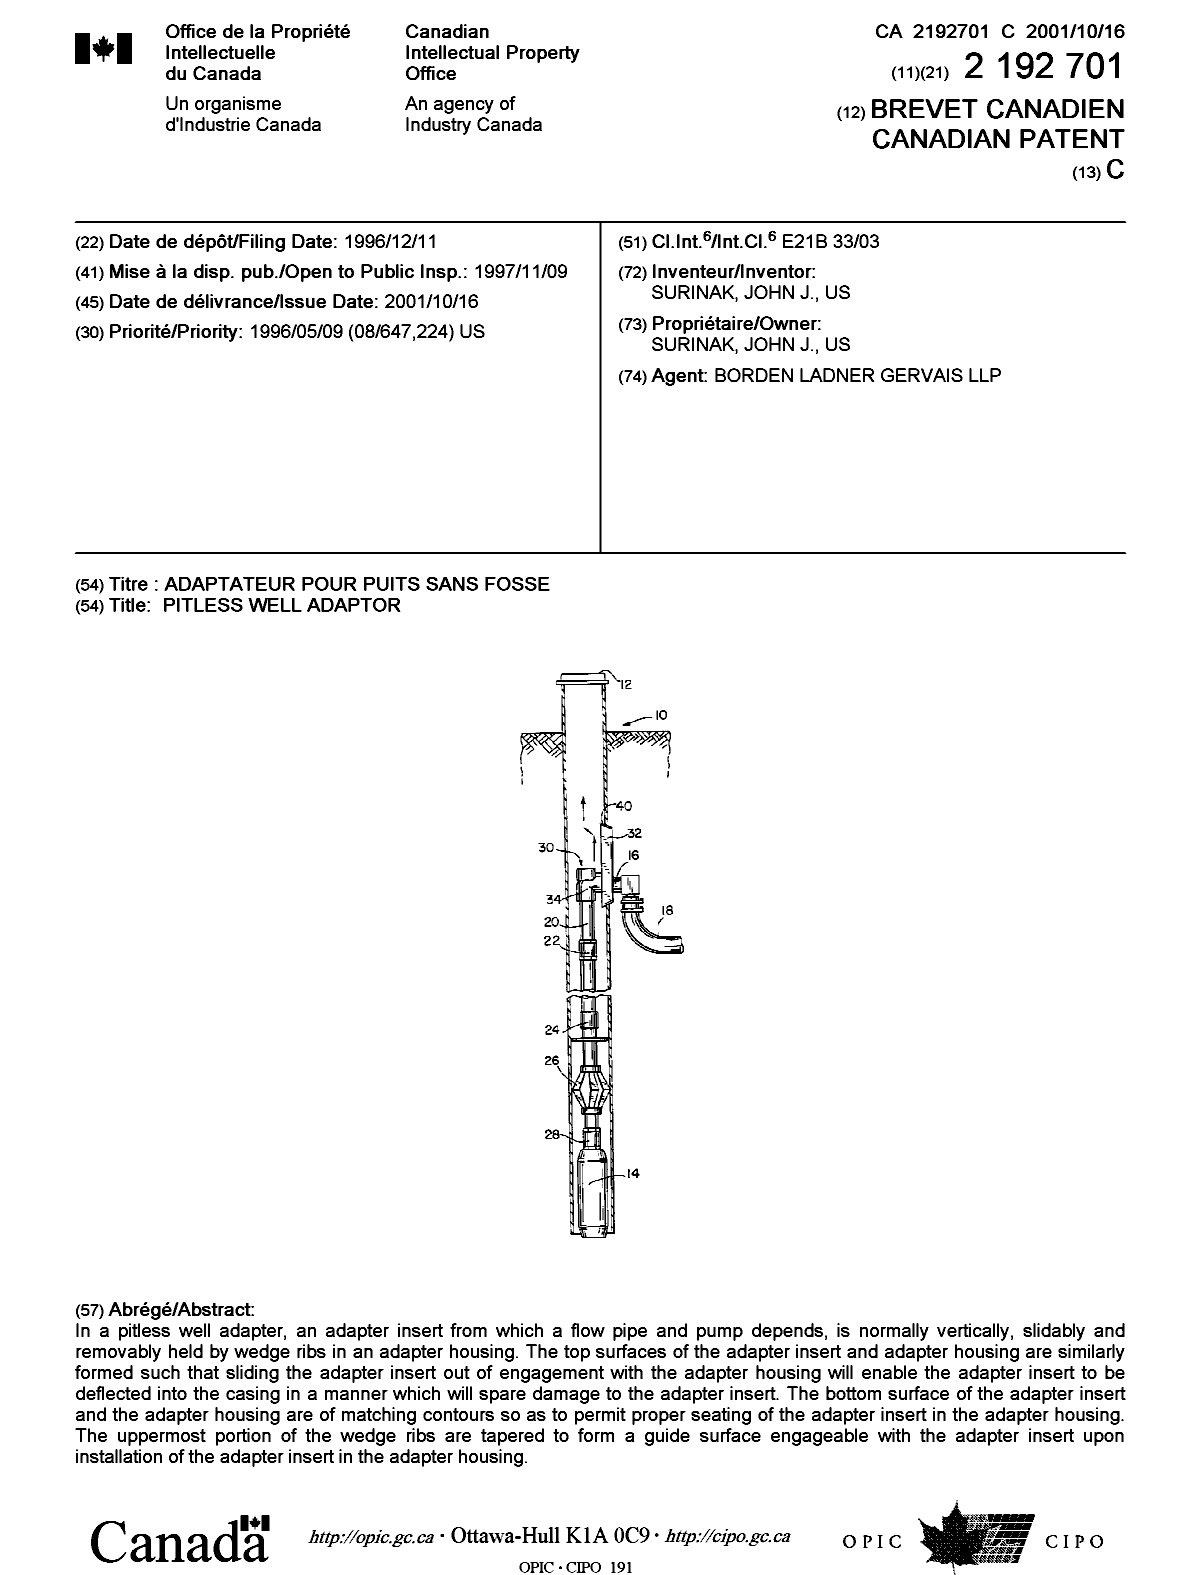 Canadian Patent Document 2192701. Cover Page 20010927. Image 1 of 1